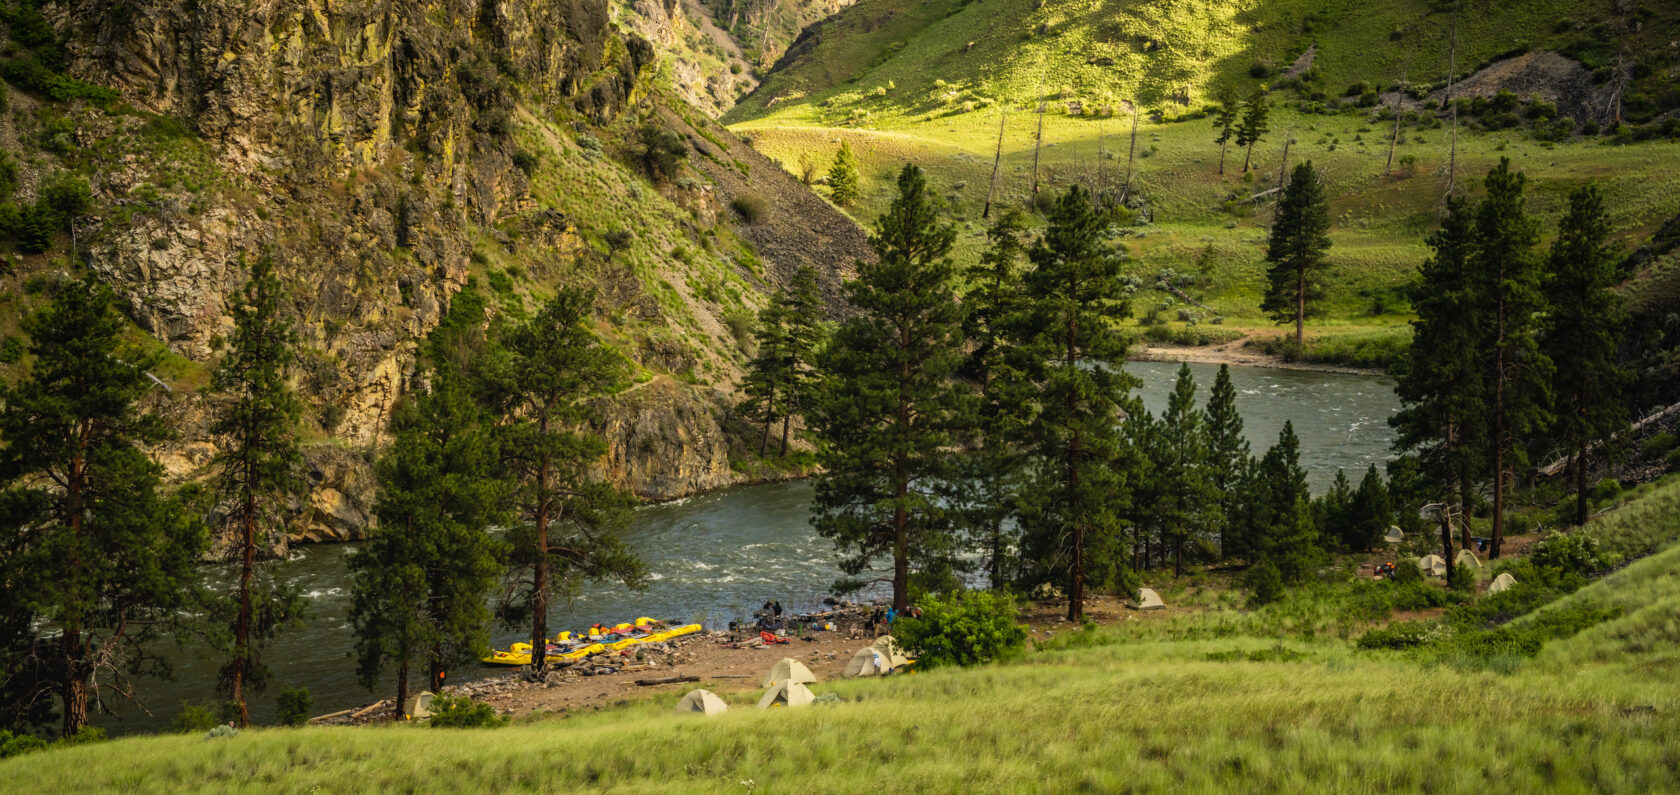 Camping along Idaho's Middle Fork of the Salmon River.